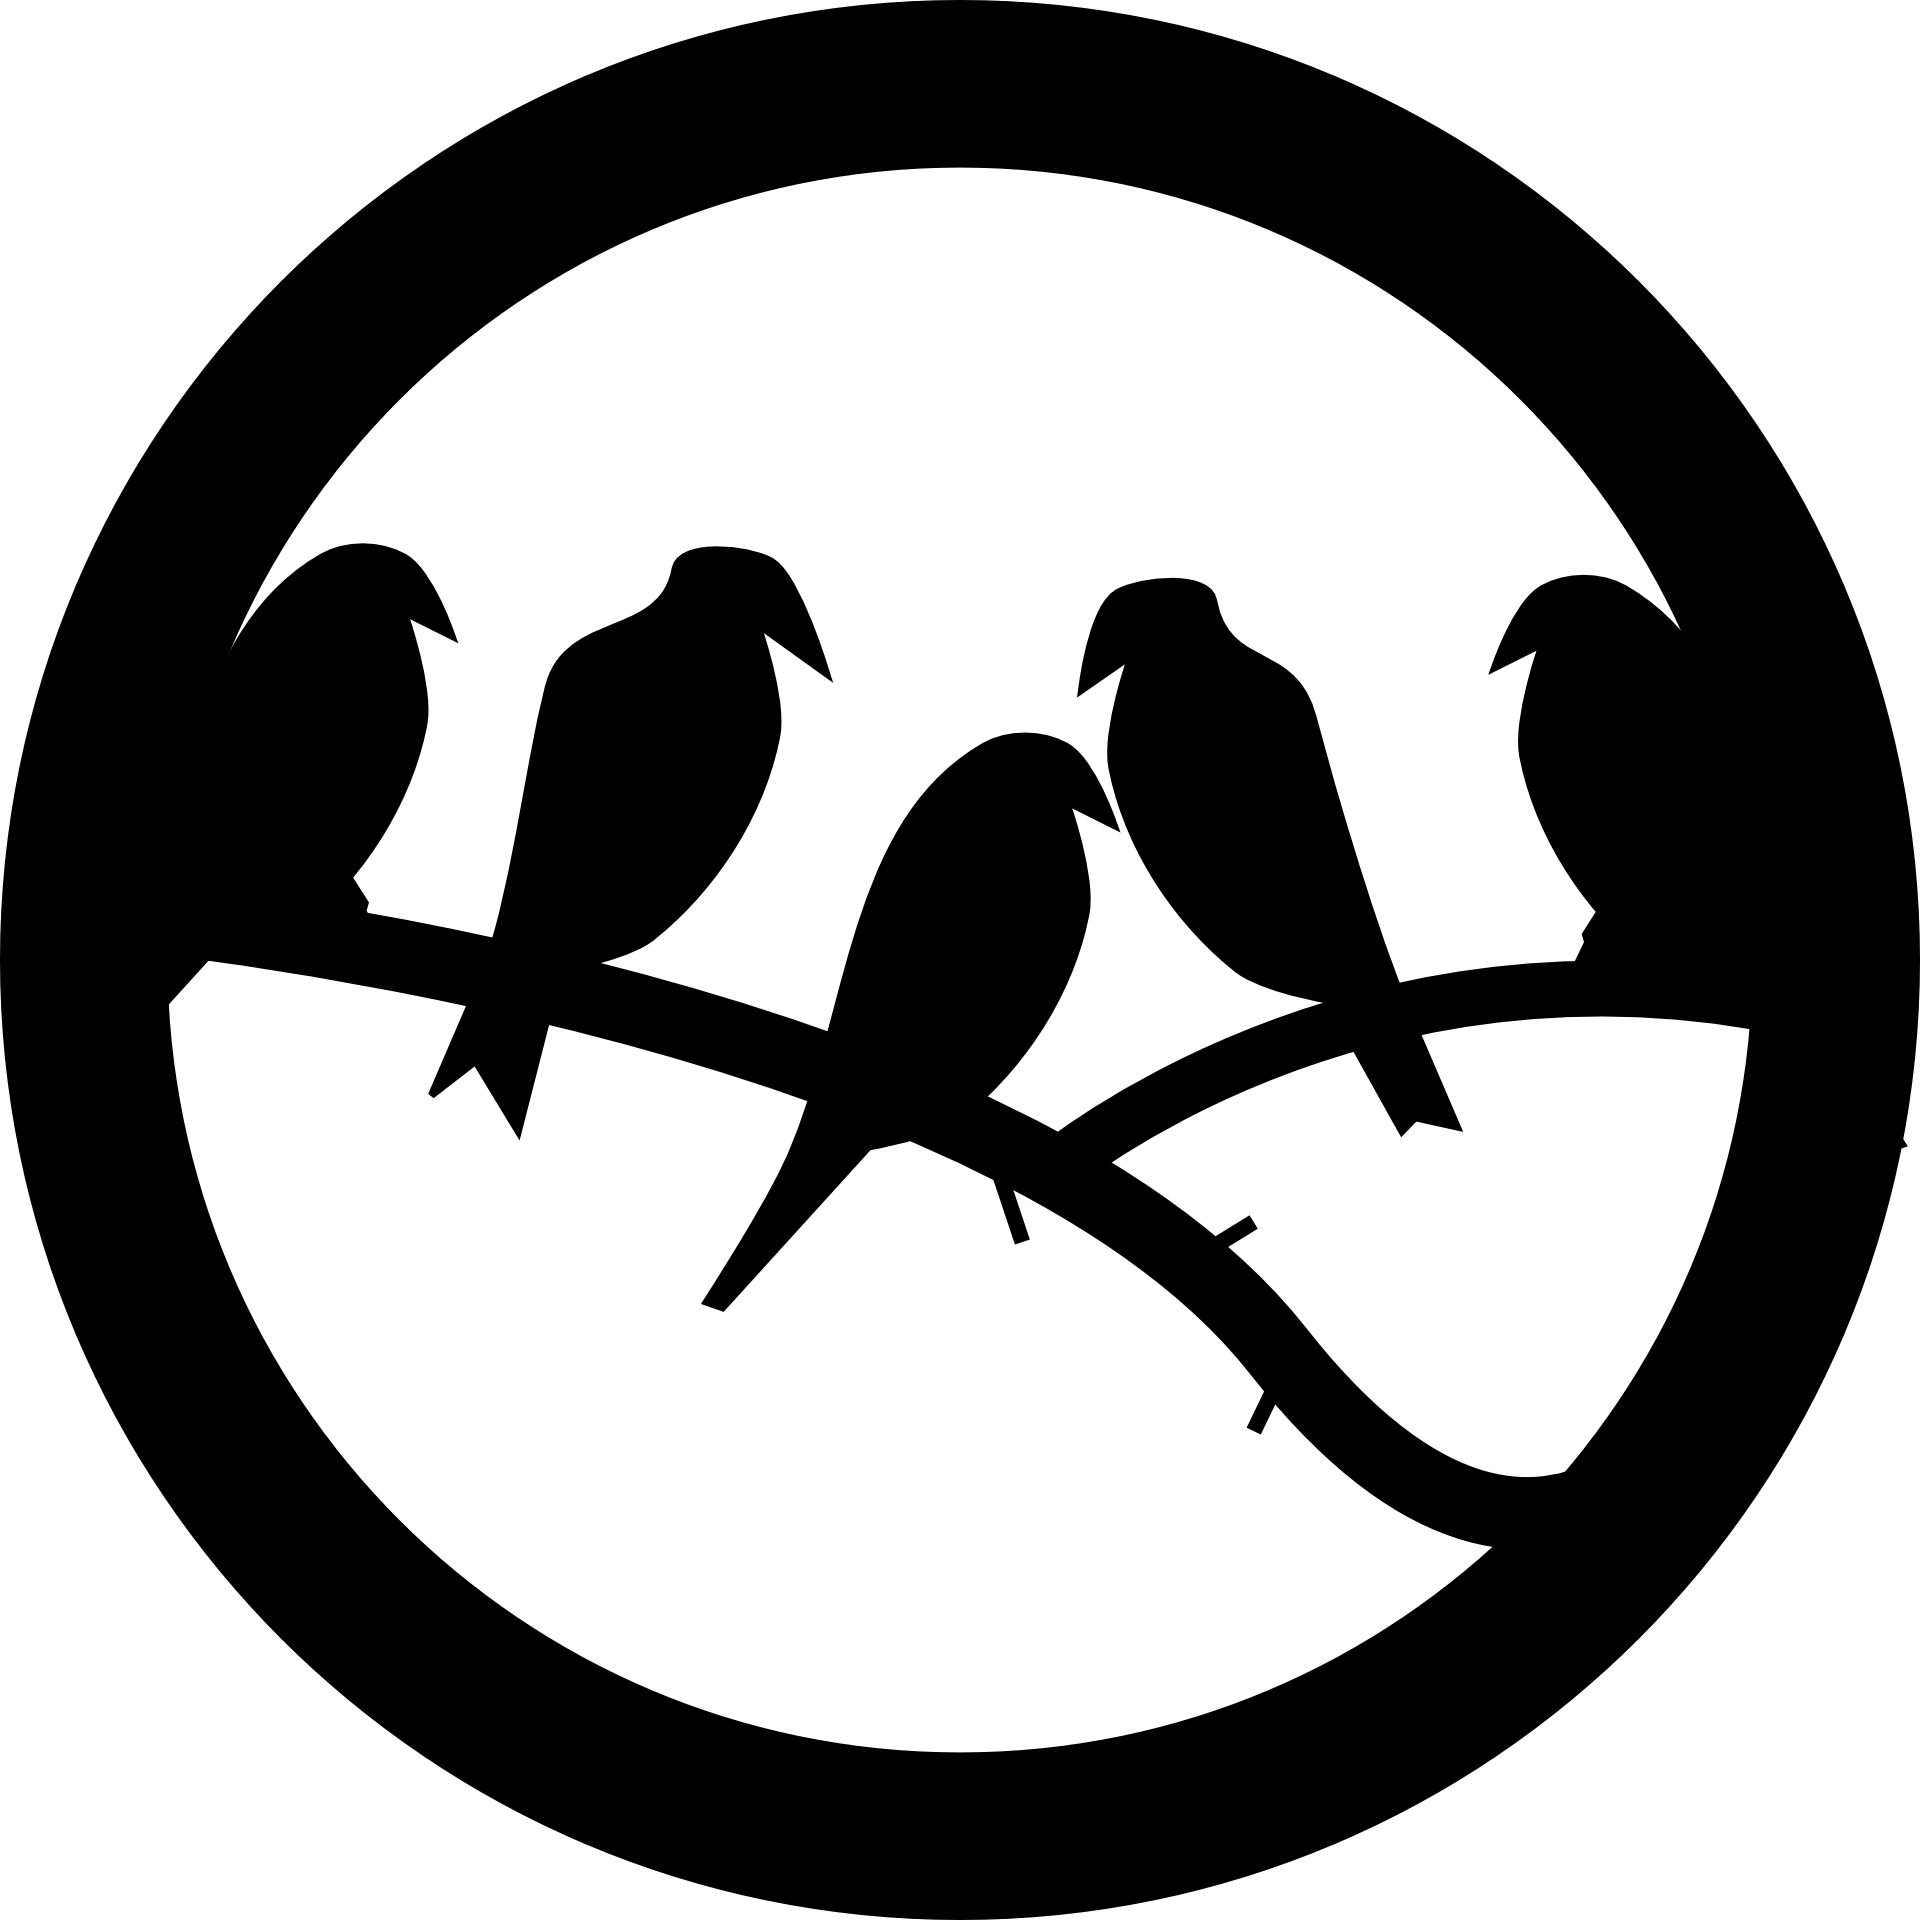 Birds on a branch drawing icon free image download